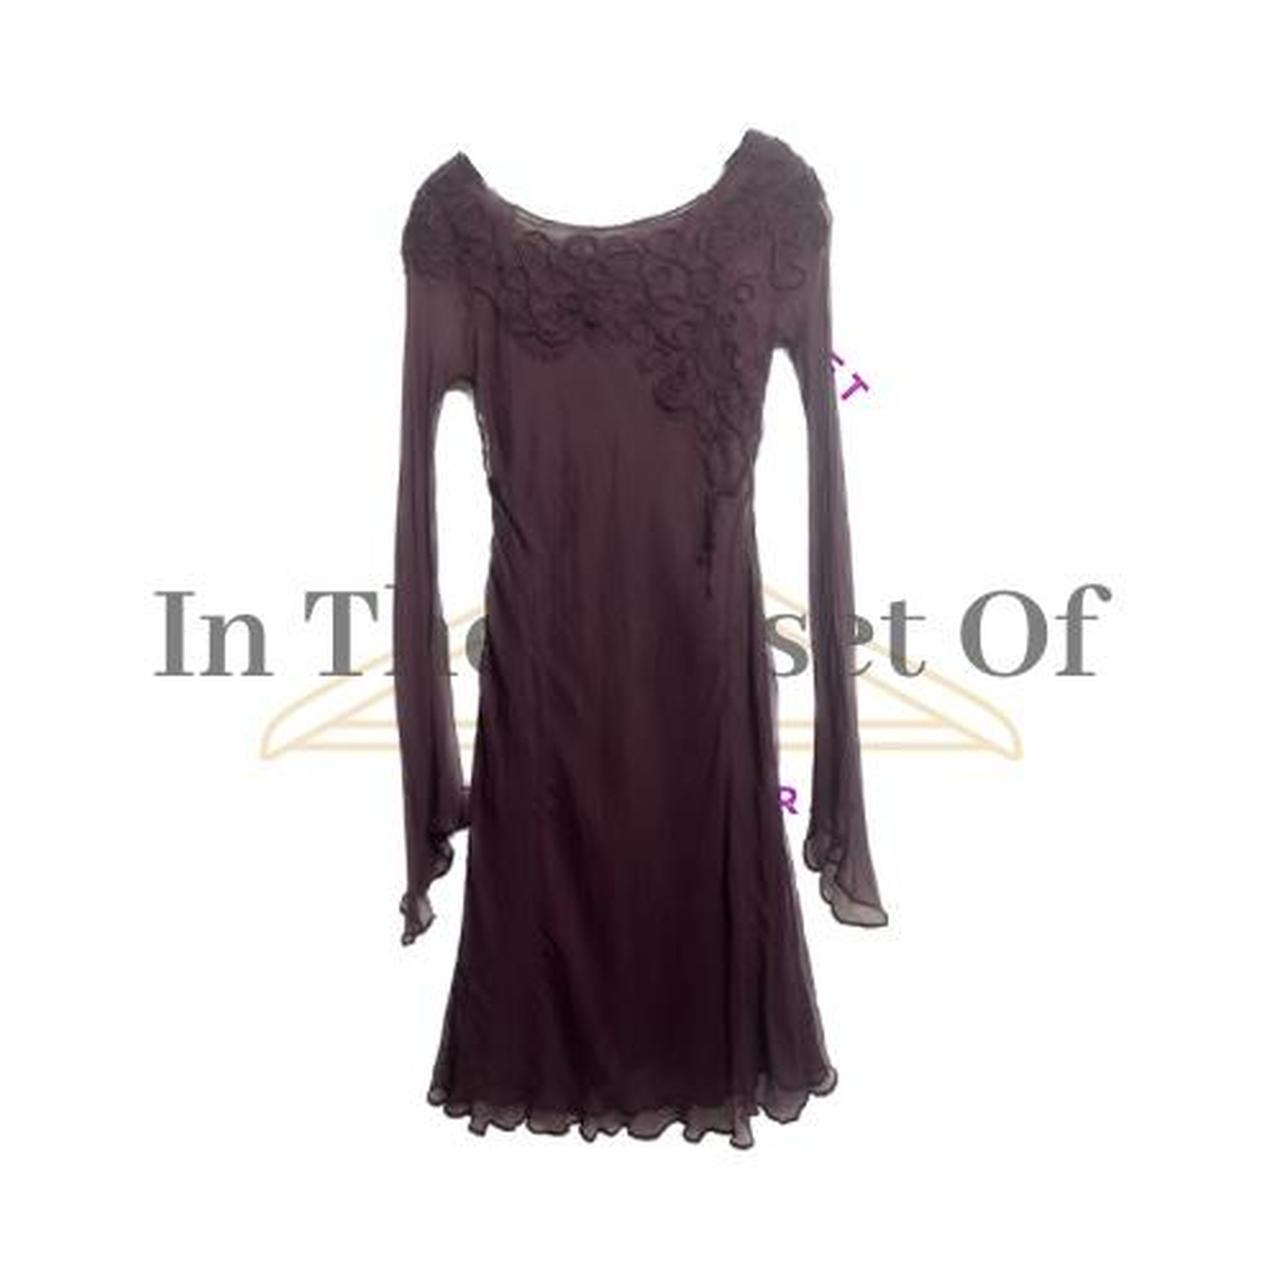 item listed by intheclosetof